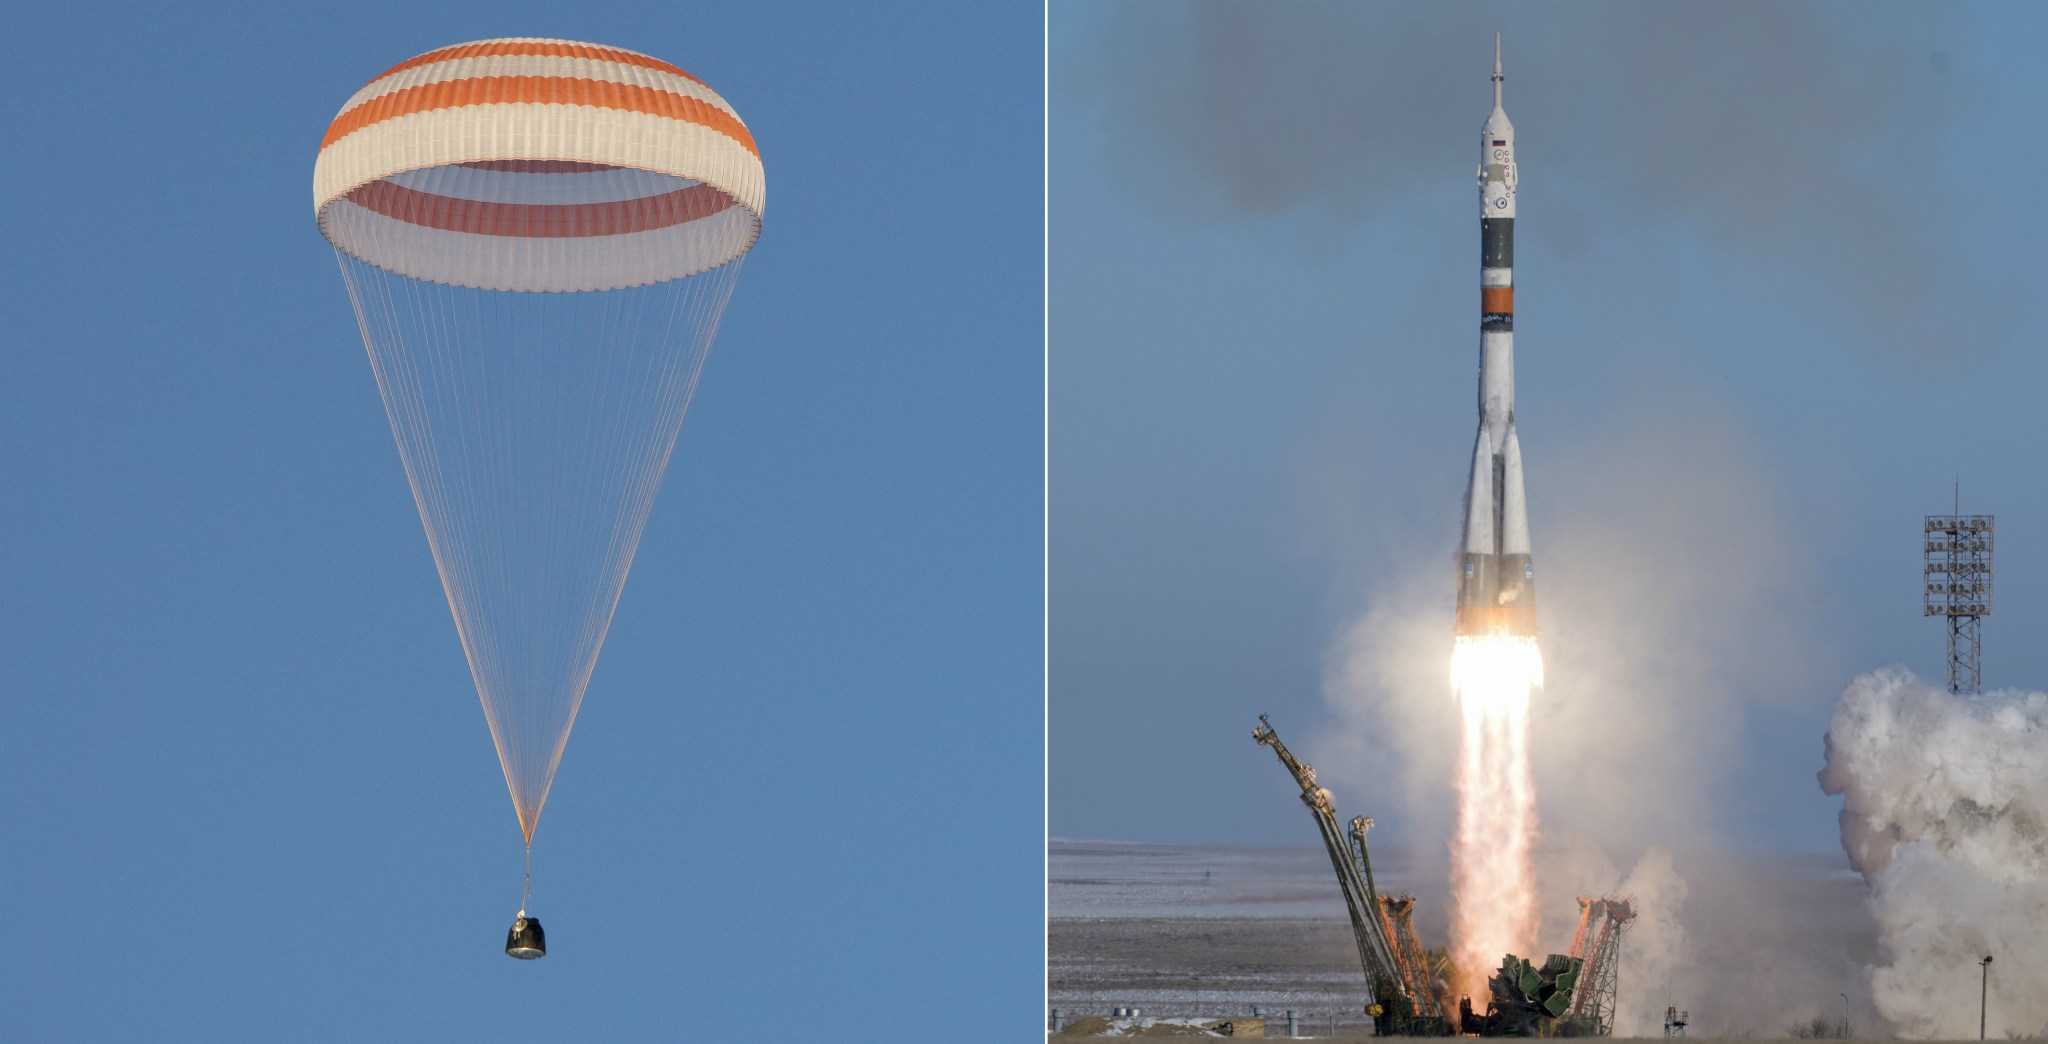 International Space Station Expedition 54 return and Expedition 55 launch